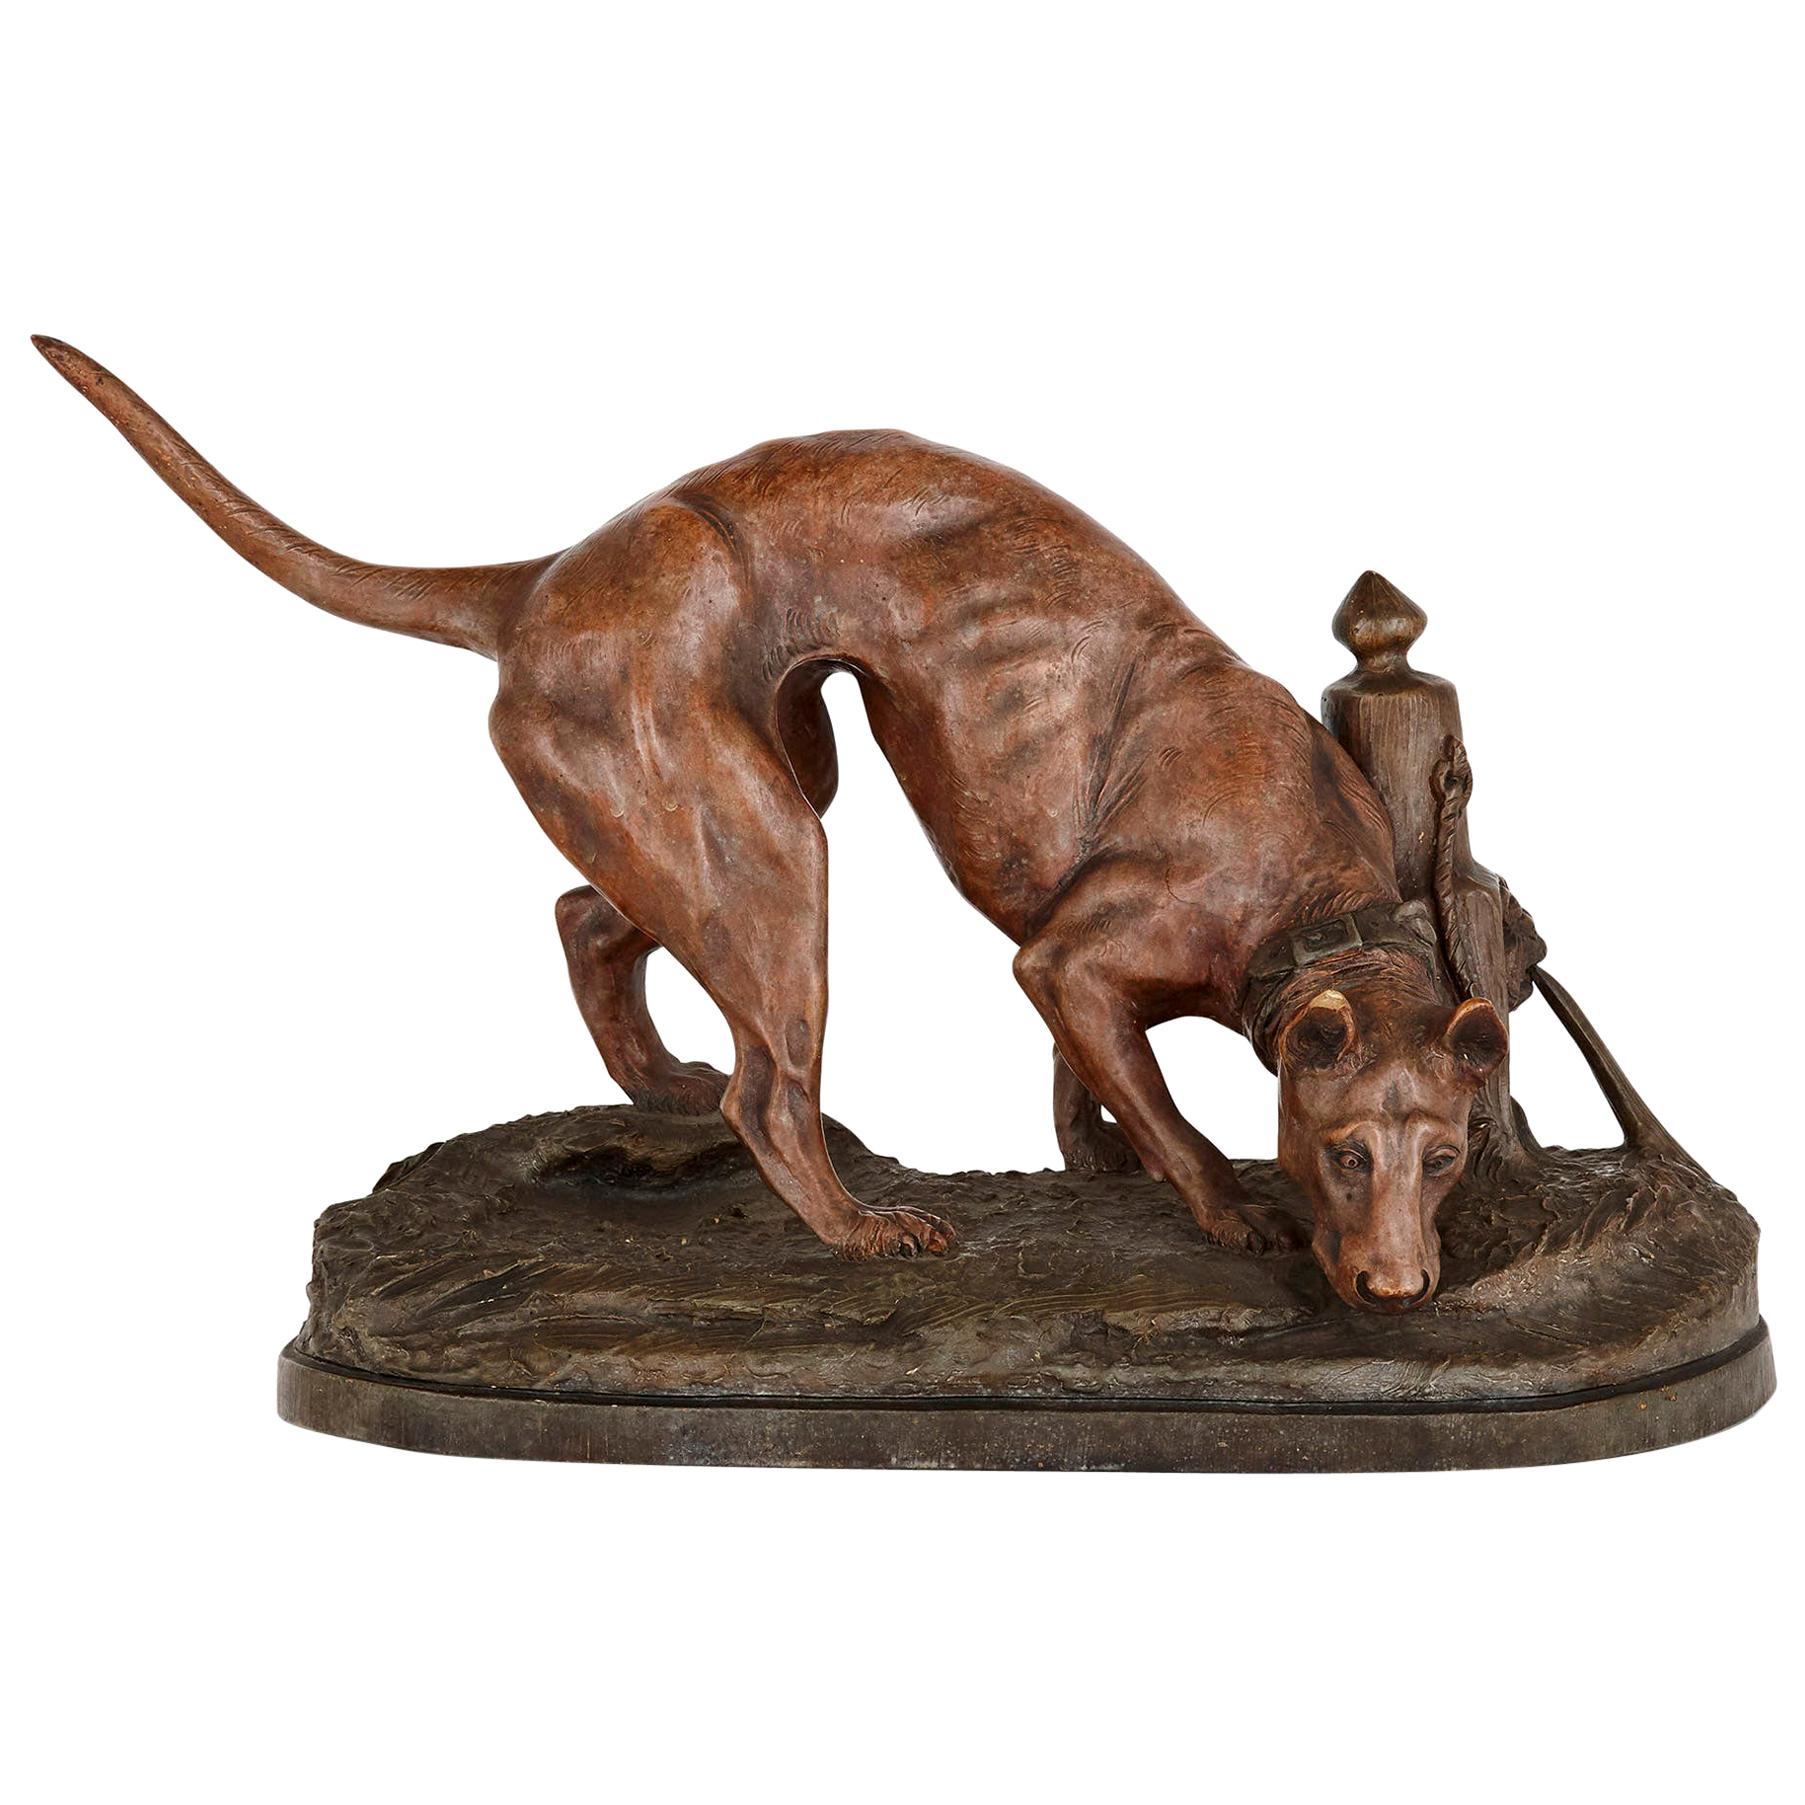 Antique 19th Century Terracotta Model of a Hound from Belgium